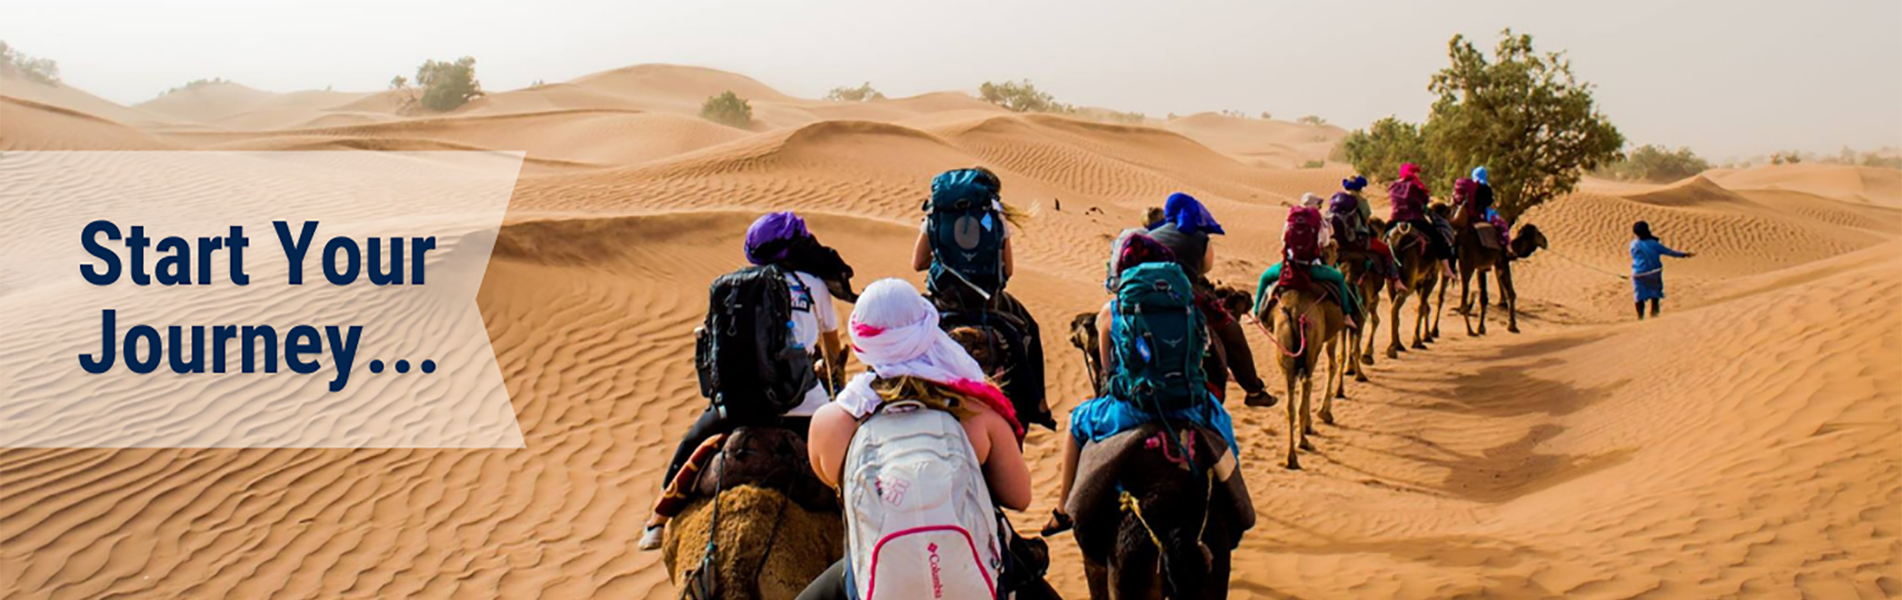 Start Your Journey - image of students abroad riding camels across the desert